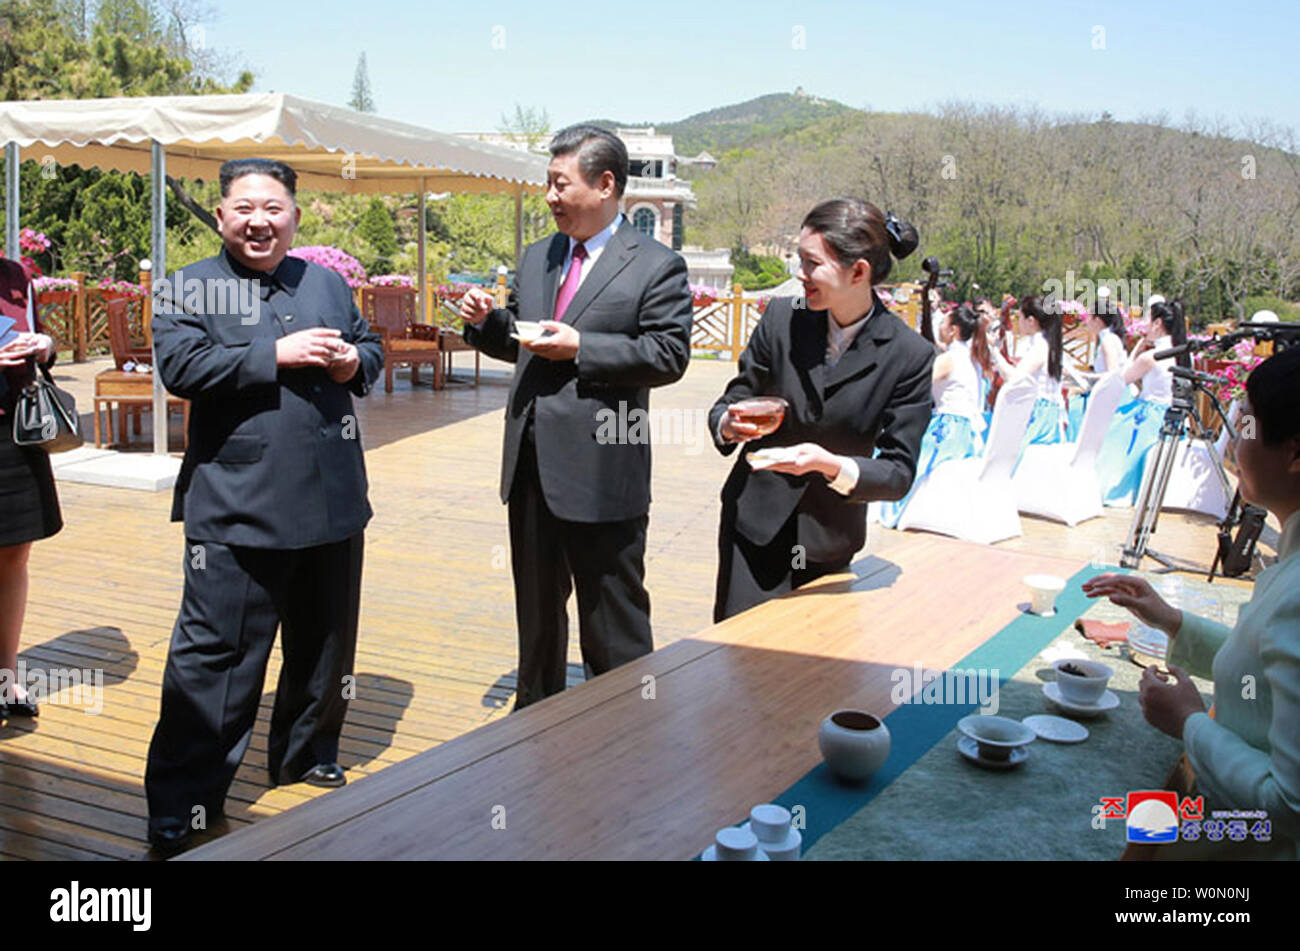 This image released on May 8, 2018, by the North Korean Official News Service (KCNA), shows North Korean leader Kim Jong Un meeting with Chinese President Xi Jinping in Dalian, China. Kim's visit came ahead of a scheduled meeting between ChinaÕs premier, Li Keqiang, President Moon Jae-in of South Korea and Prime Minister Shinzo Abe of Japan, to discuss North Korean denuclearization. Photo by KCNA/UPI Stock Photo